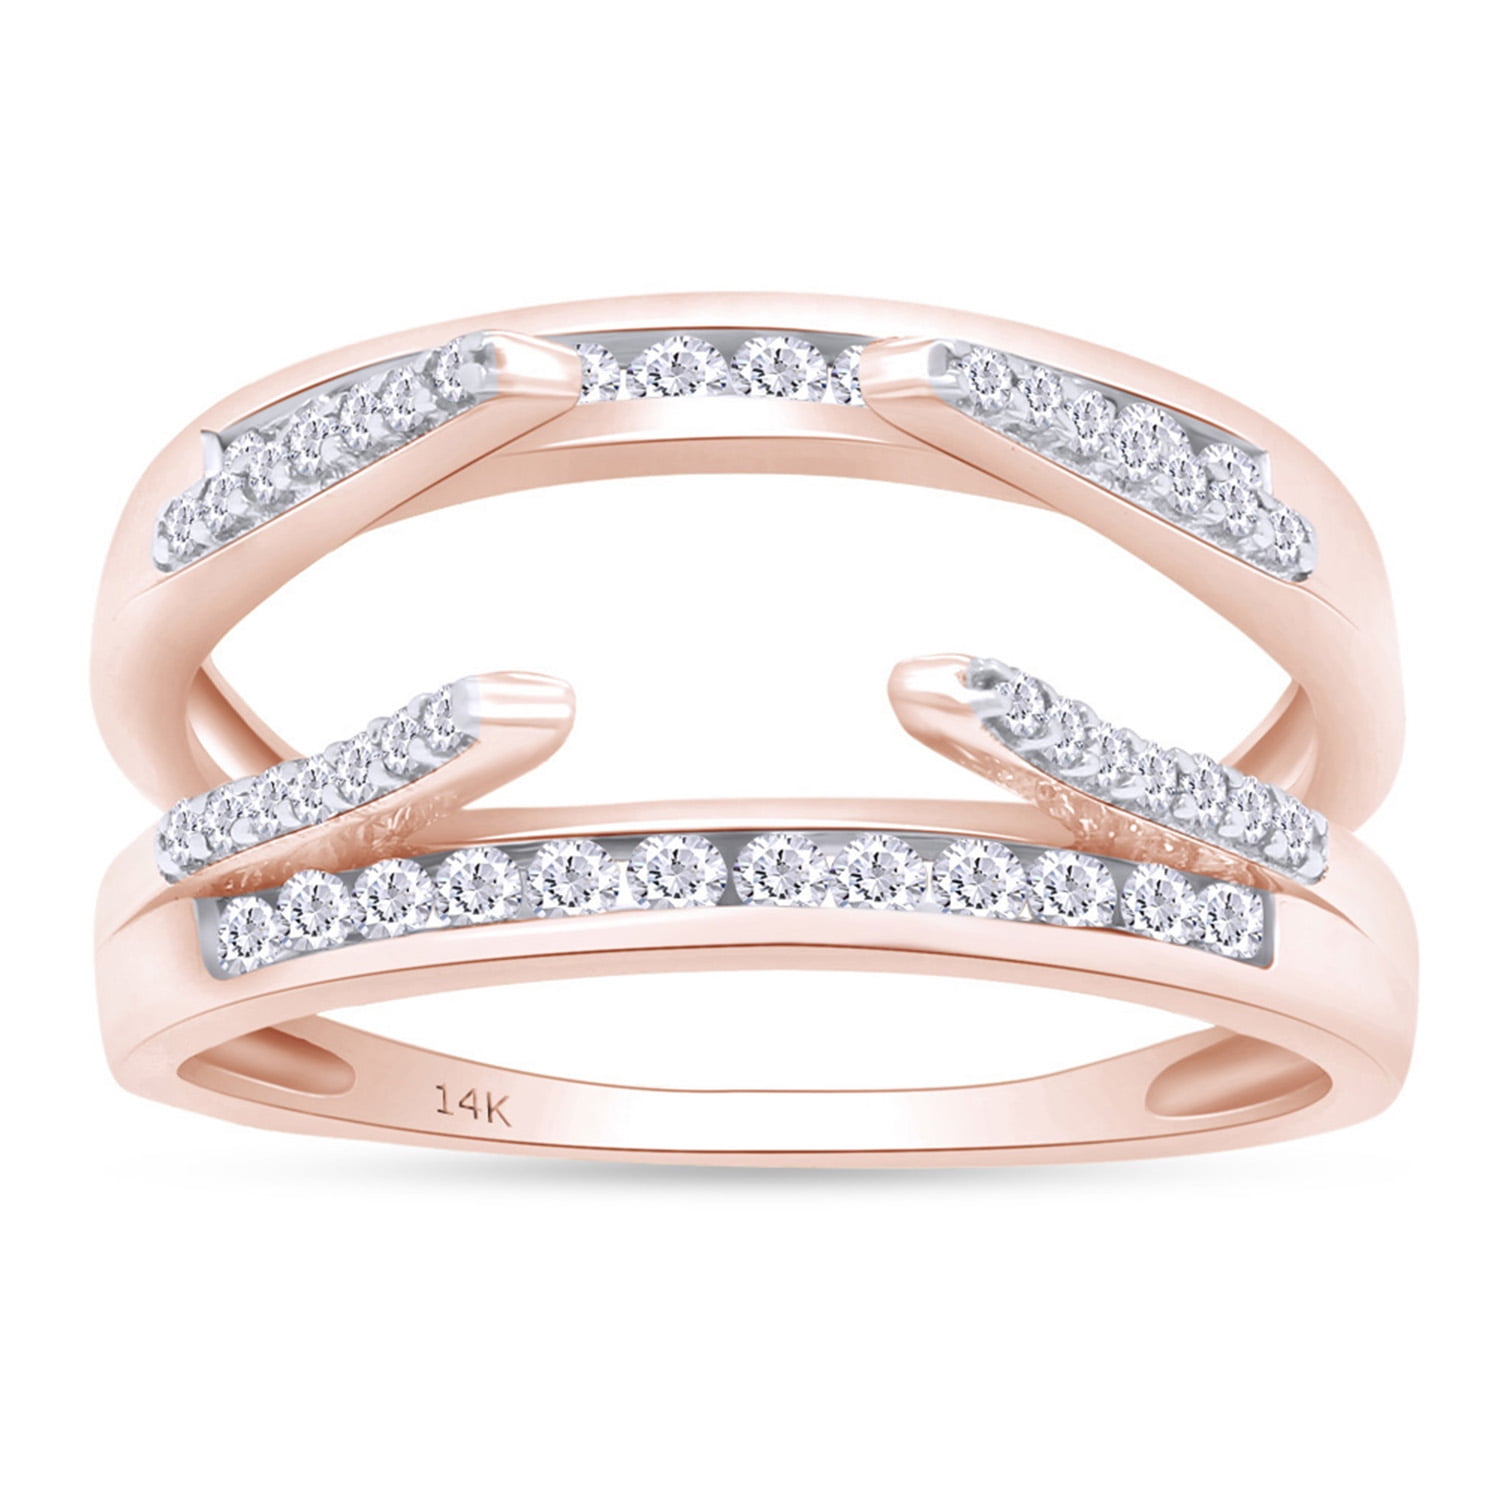 14k Rose Gold Ribbon Ring with Cubic Zirconia Size 5.25 – JT Jewelry Shop